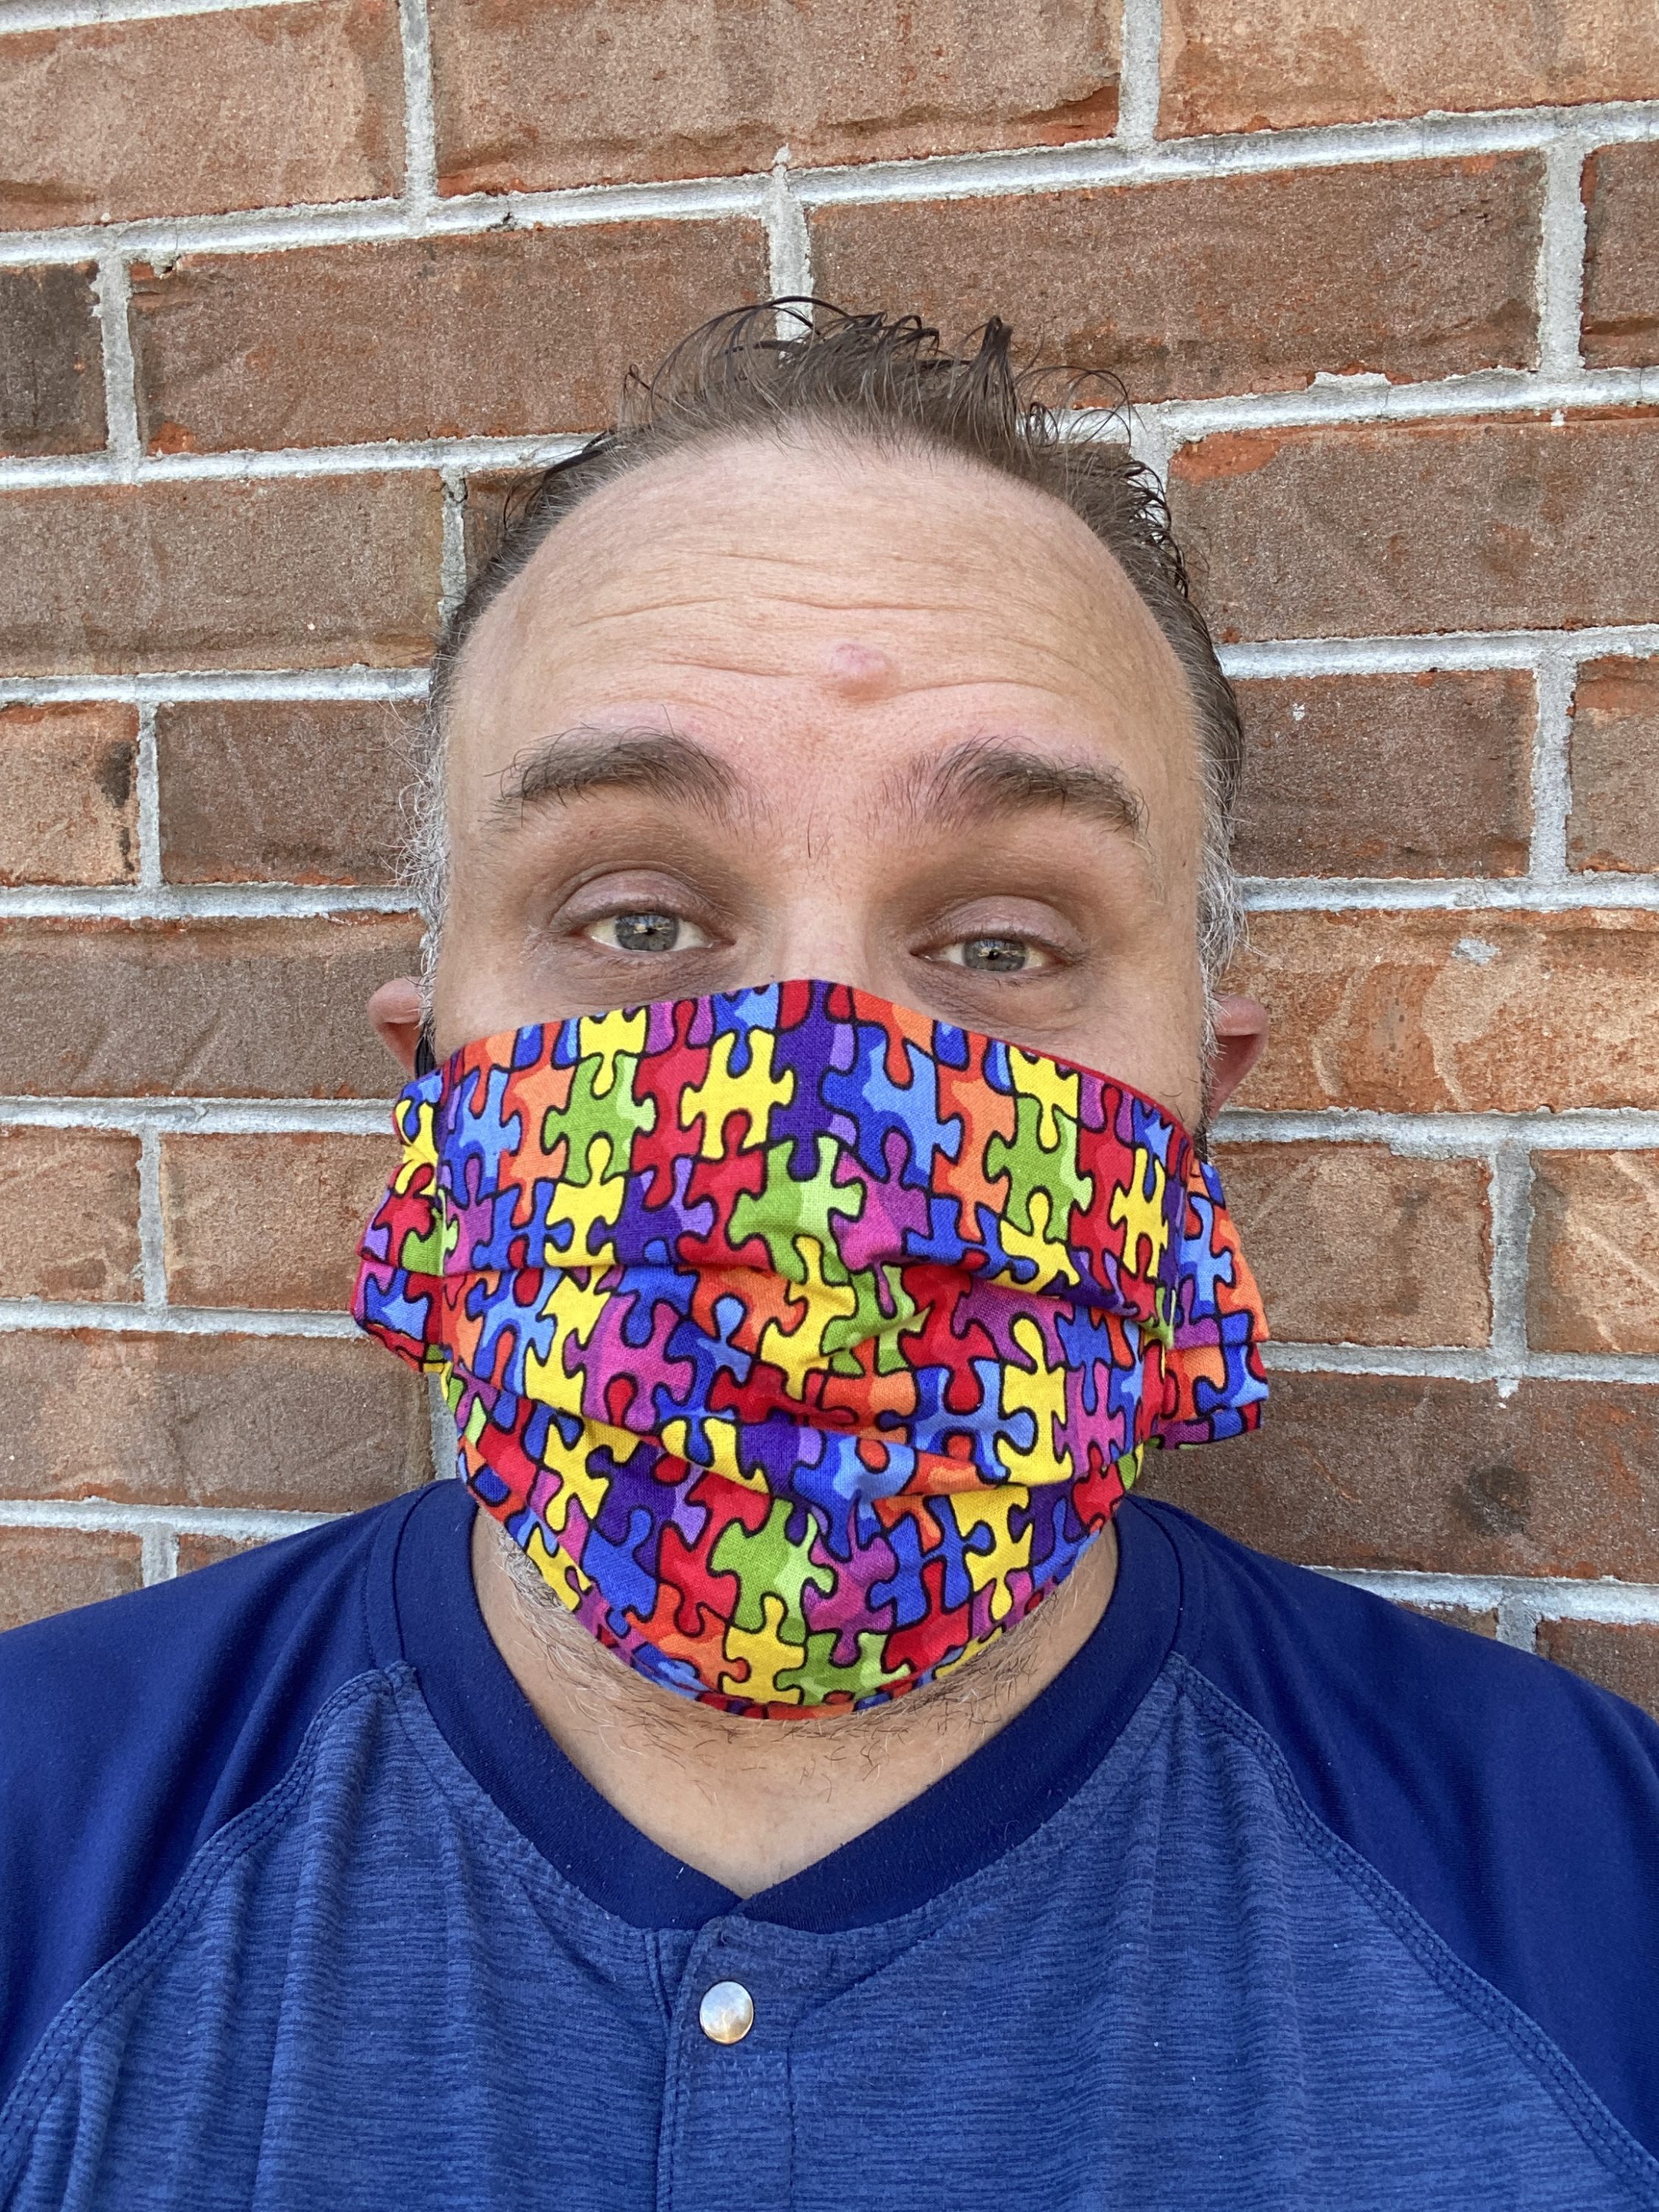 Steve wearing Autism Awareness Face Mask and wearing blue for Autism Awareness Day